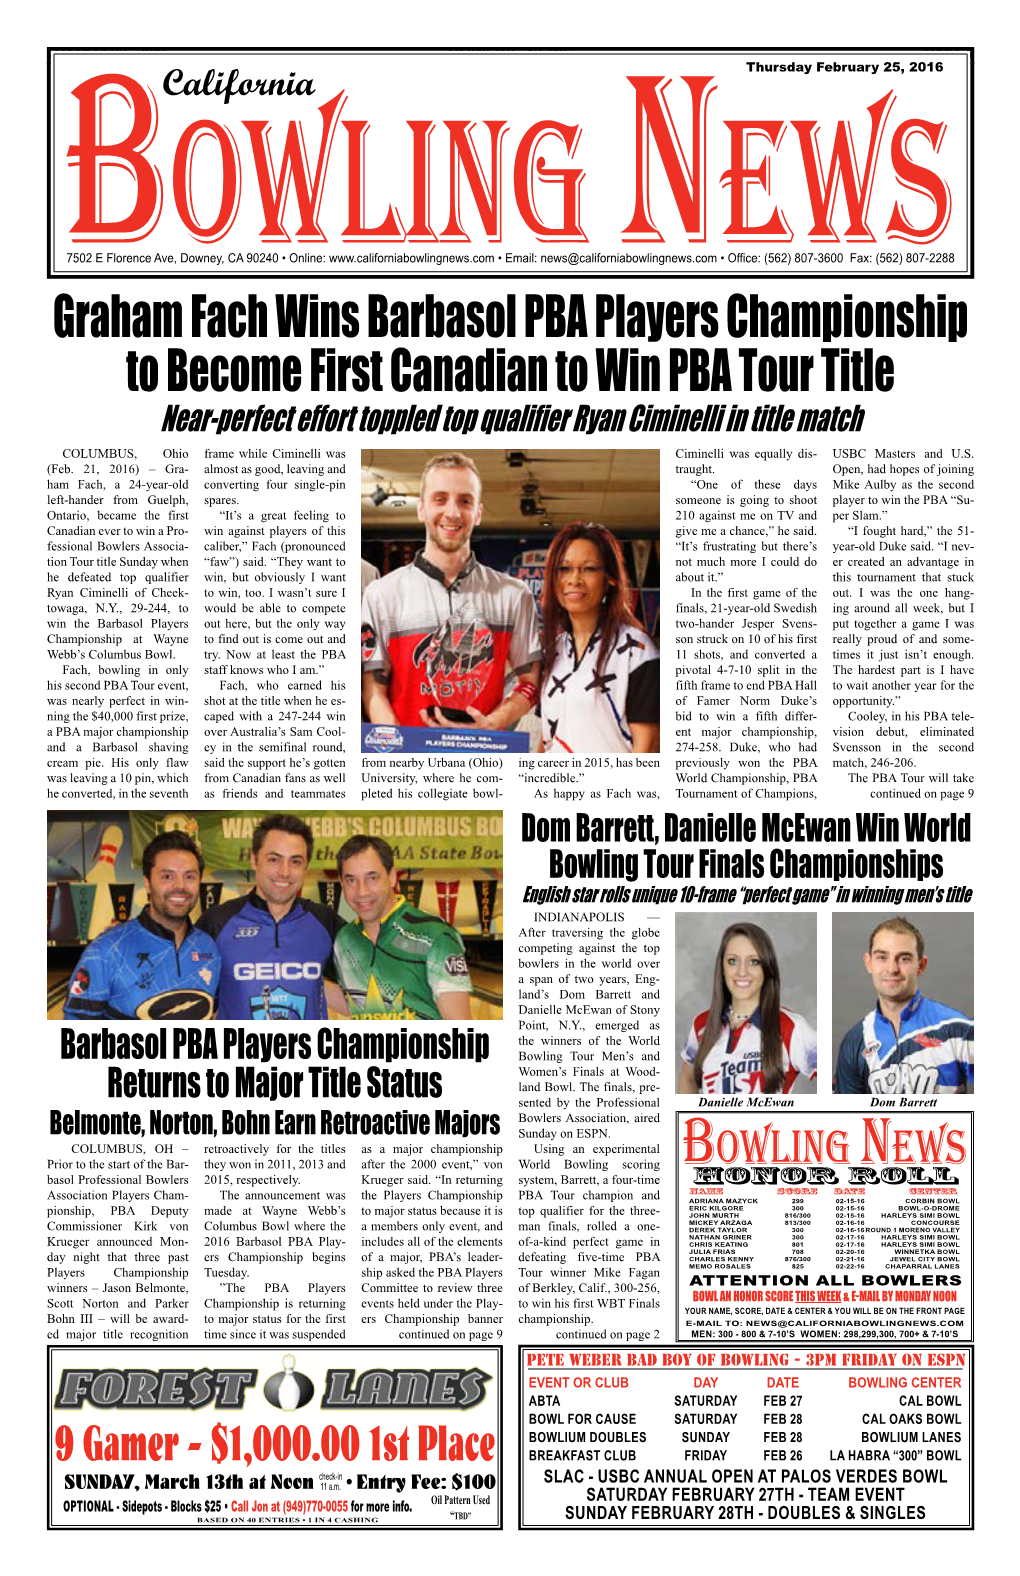 Graham Fach Wins Barbasol PBA Players Championship to Become